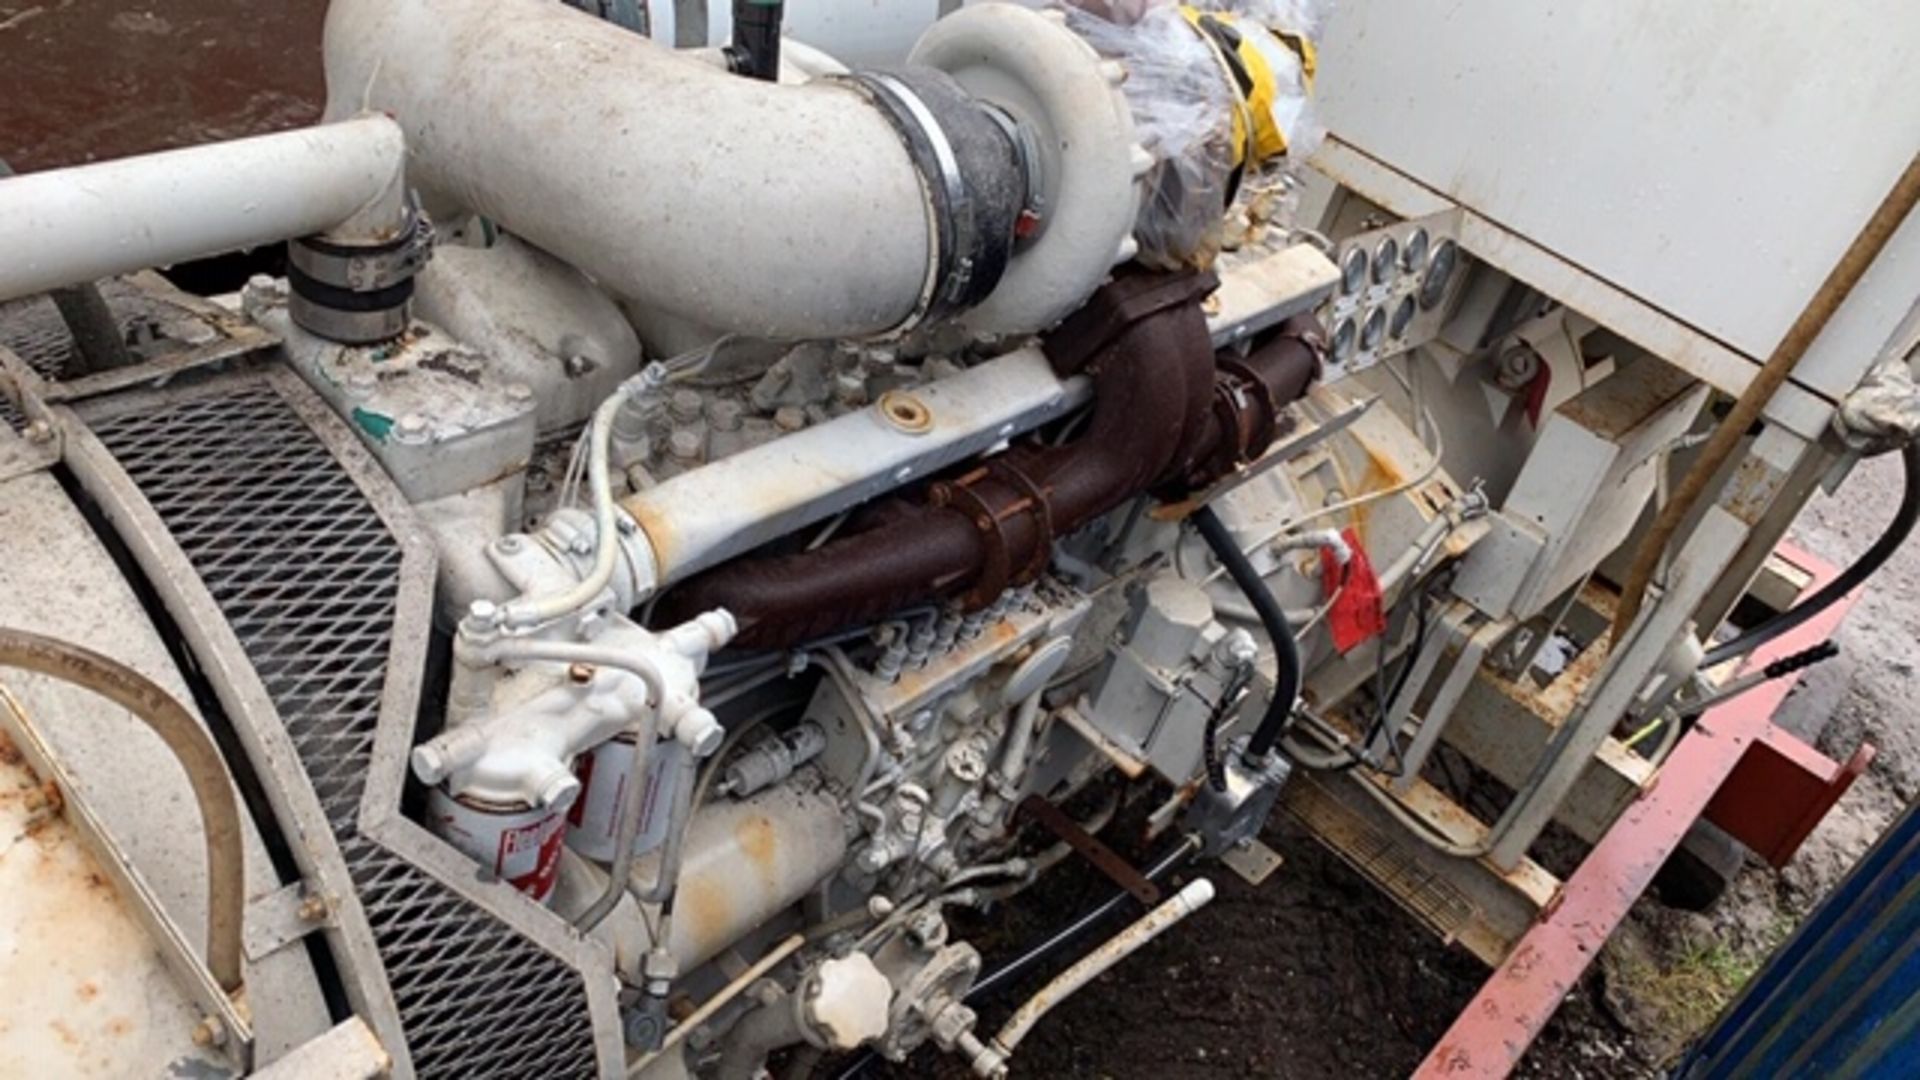 PUMA 200KVA VOLVO TURBO ENGINED DIESEL GENERATOR, PREVIOUS AIRPORT STANDBY UNIT, SHOWING 478REC HRS. - Image 5 of 5